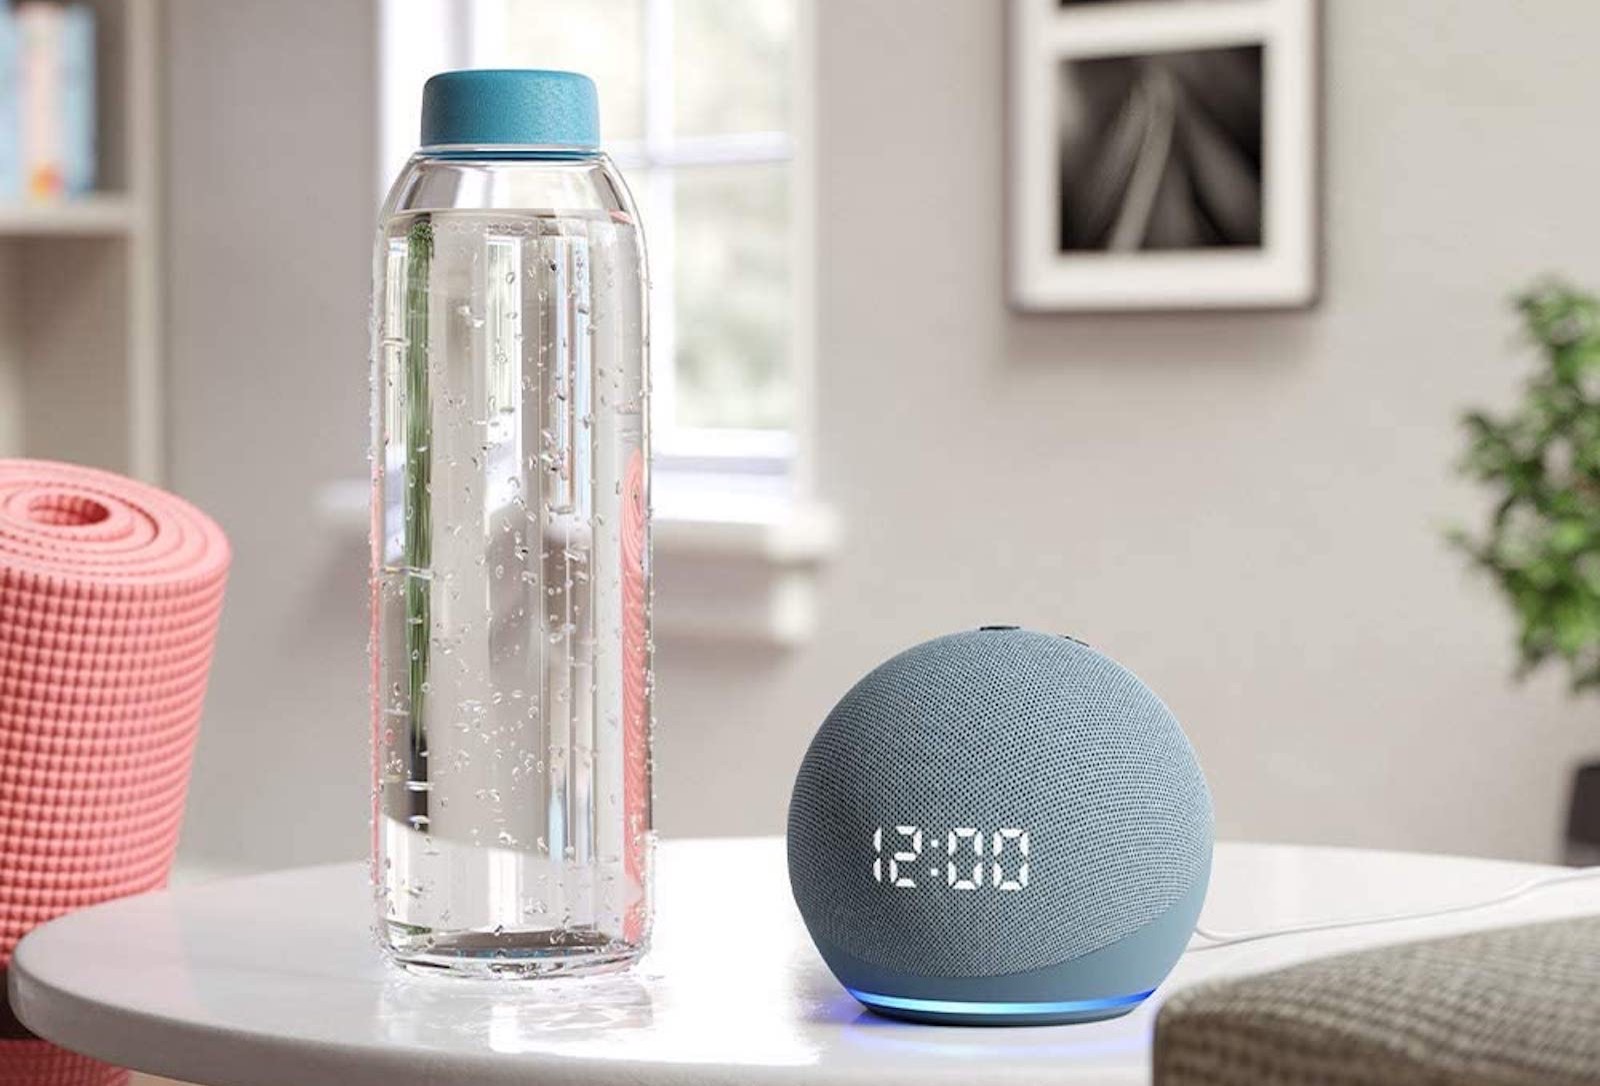 Echo dot with clock